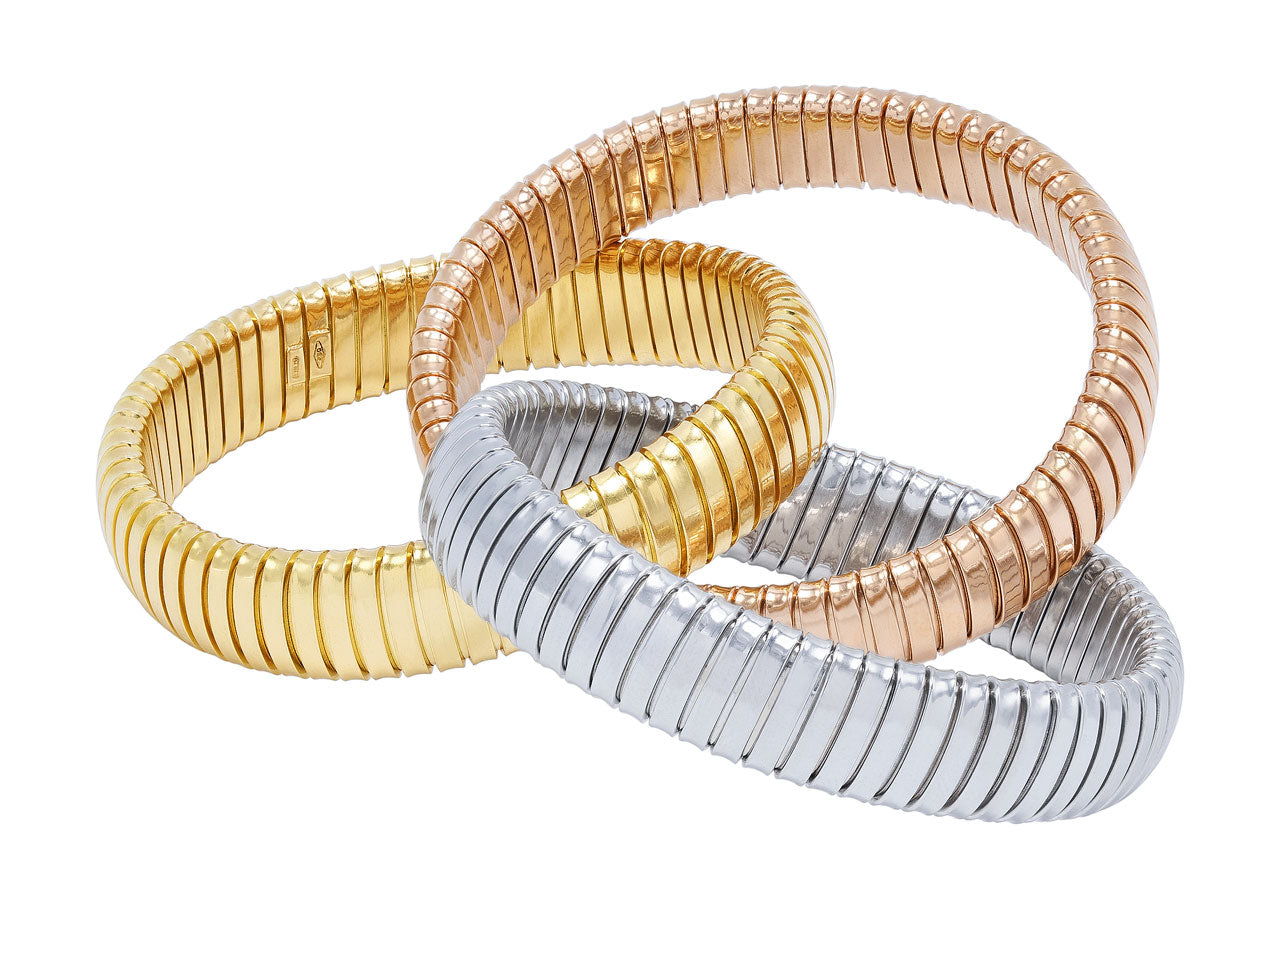 Rolling Bracelet in 18K Yellow, White and Rose Gold, 12mm, by Beladora